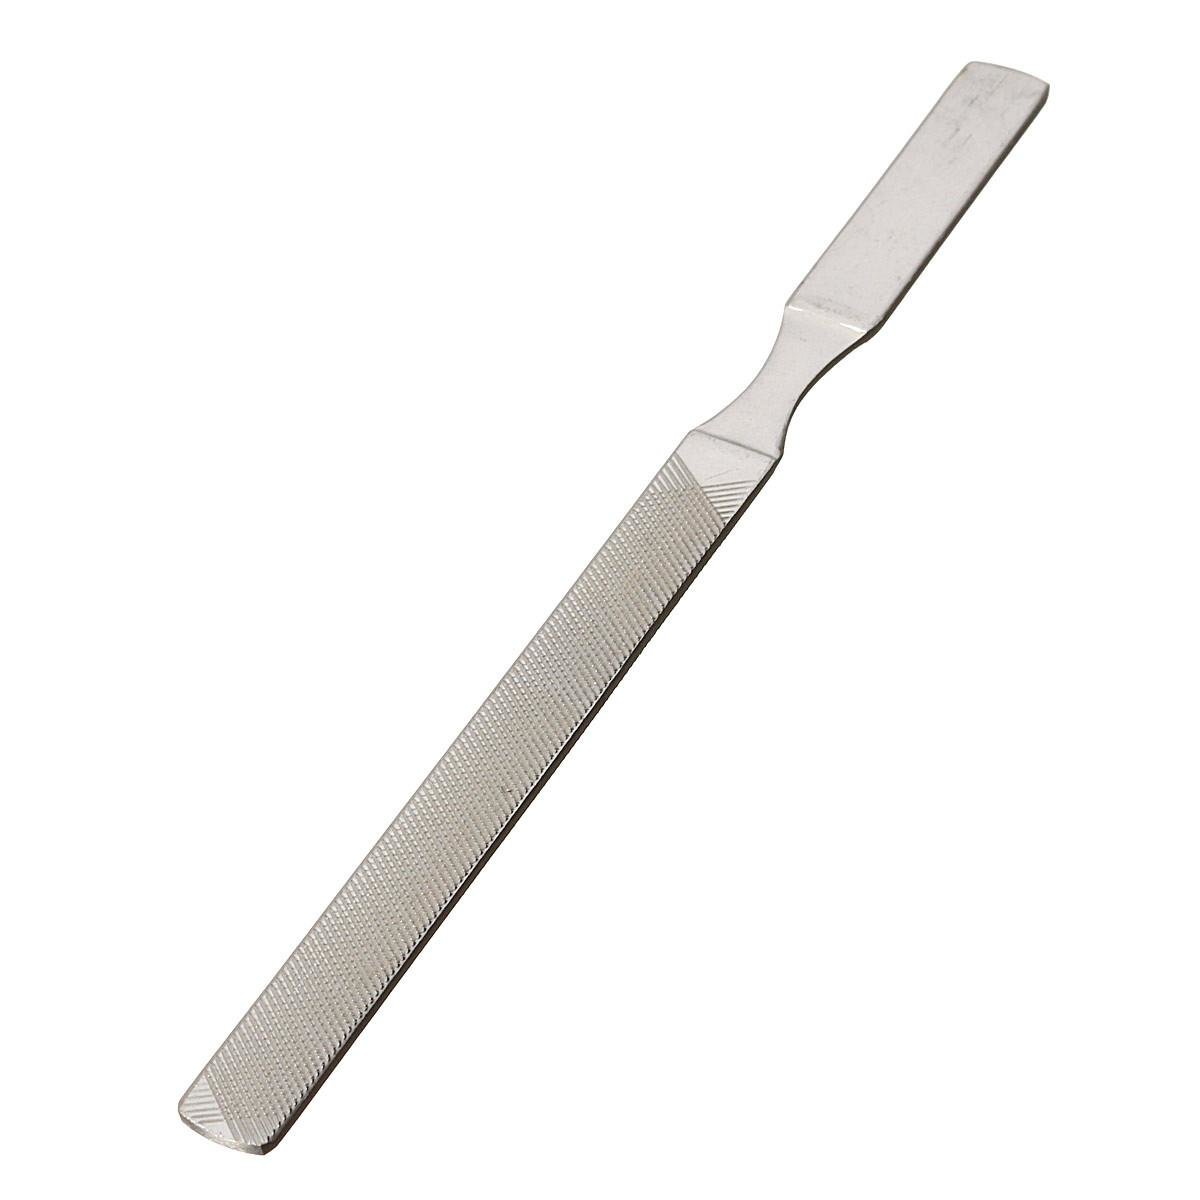 

Stainless Steel Pedicure Nail File Manicure Pedicure Salon Tools